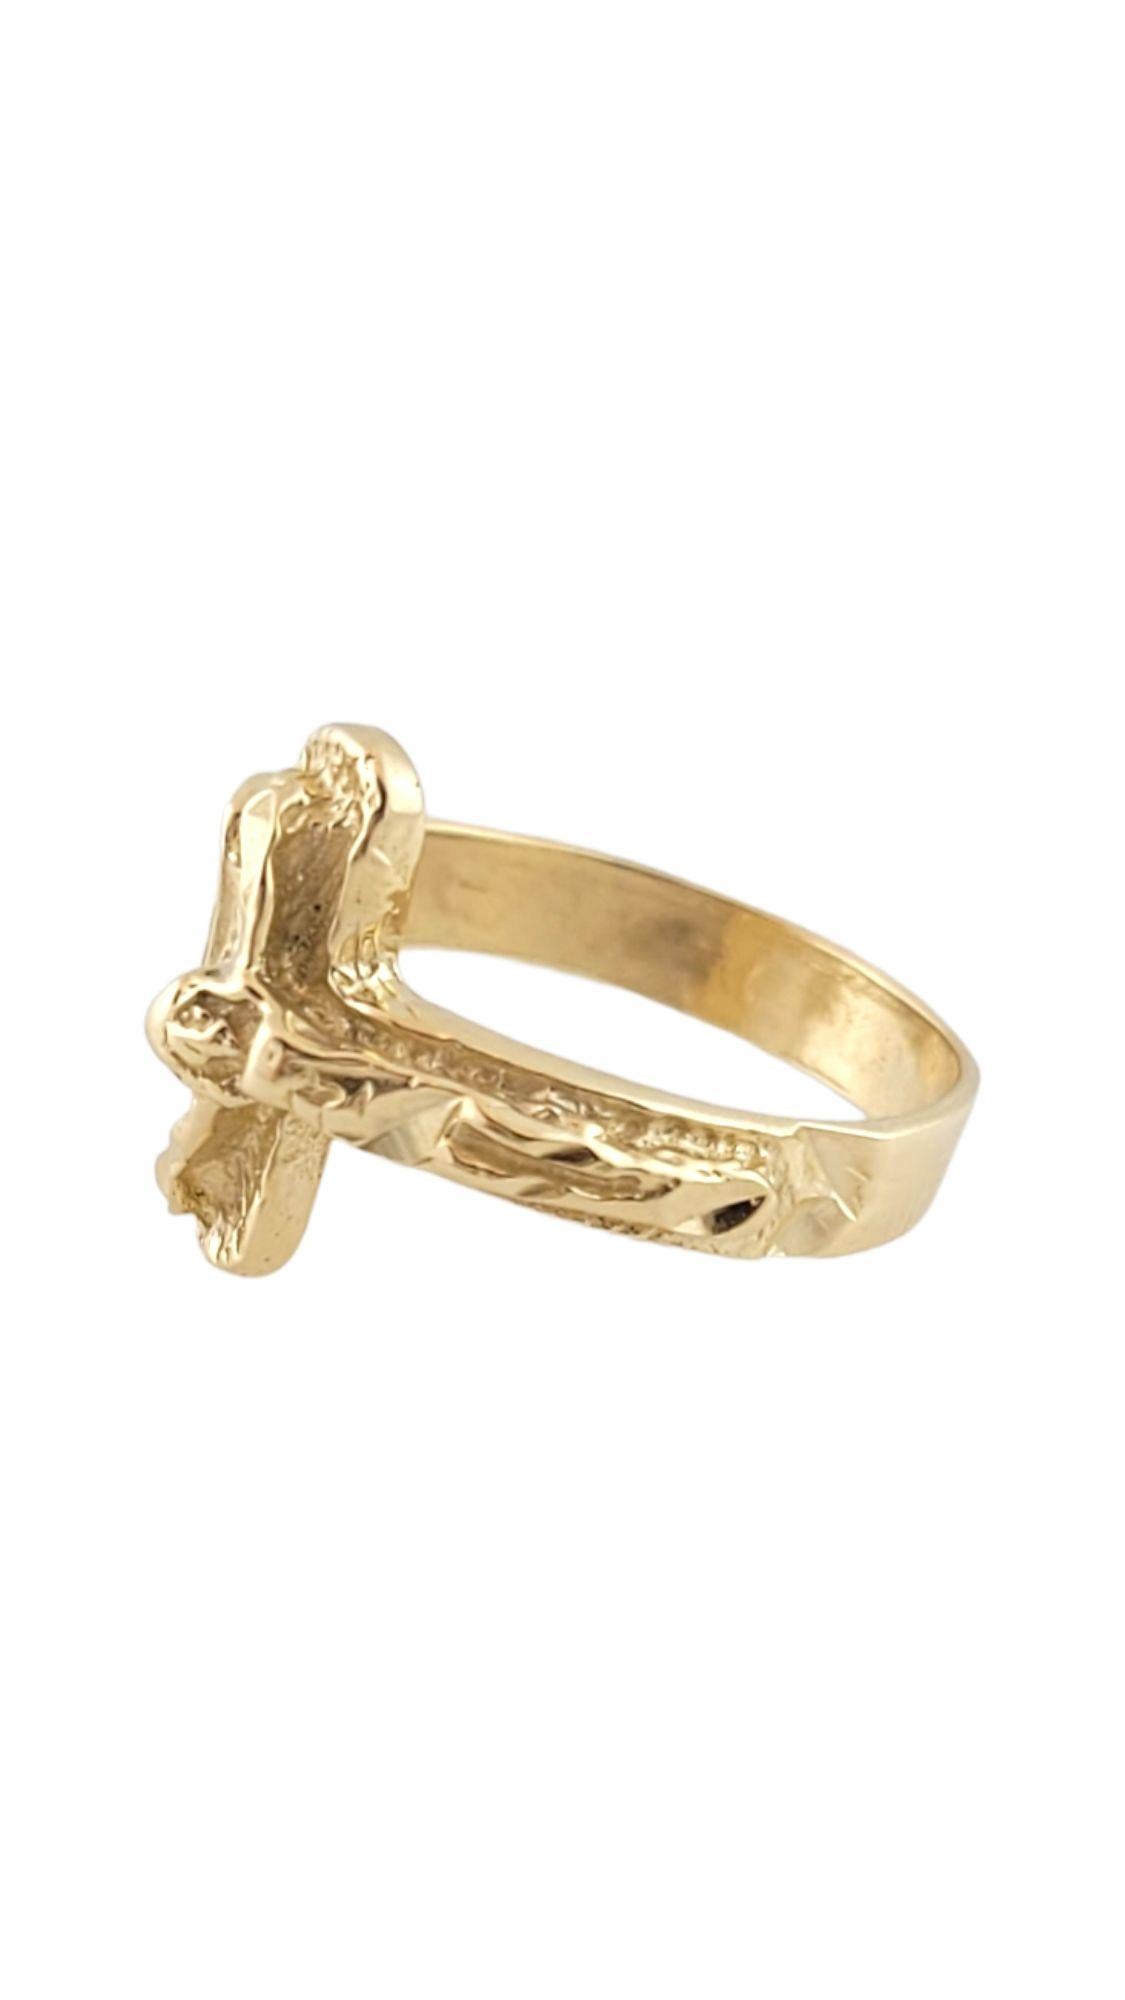 This beautiful 14K gold ring is designed with a great depiction of Jesus on a cross!

Ring size: 6

Shank: 3.4mm

Front:13.7mm

Weight: 3.70 g/ 2.4 dwt

Hallmark: 14K

Very good condition, professionally polished.

Will come packaged in a gift box